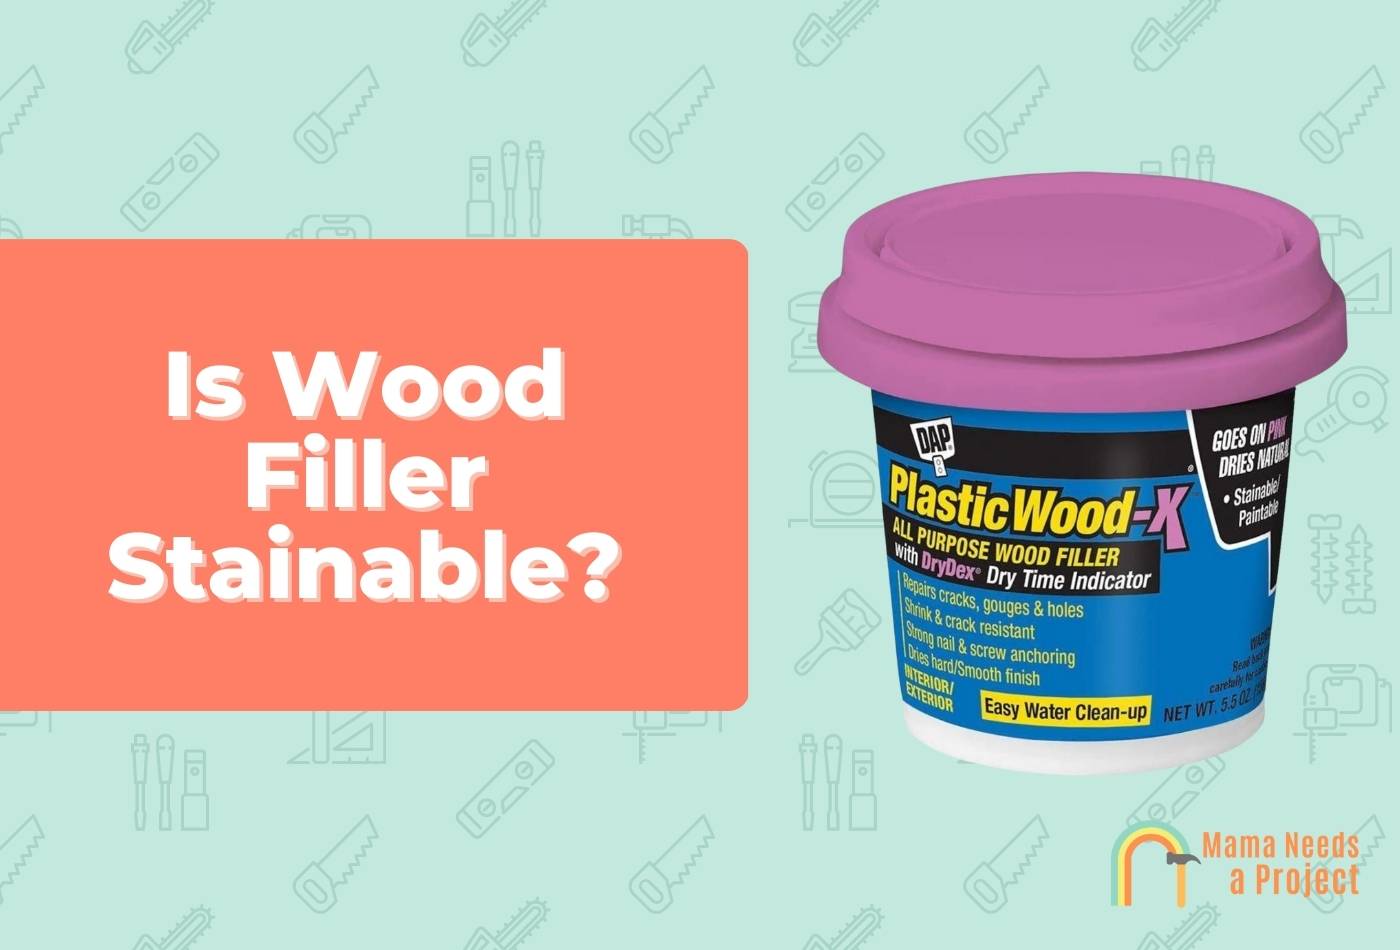 Is Wood Filler Stainable